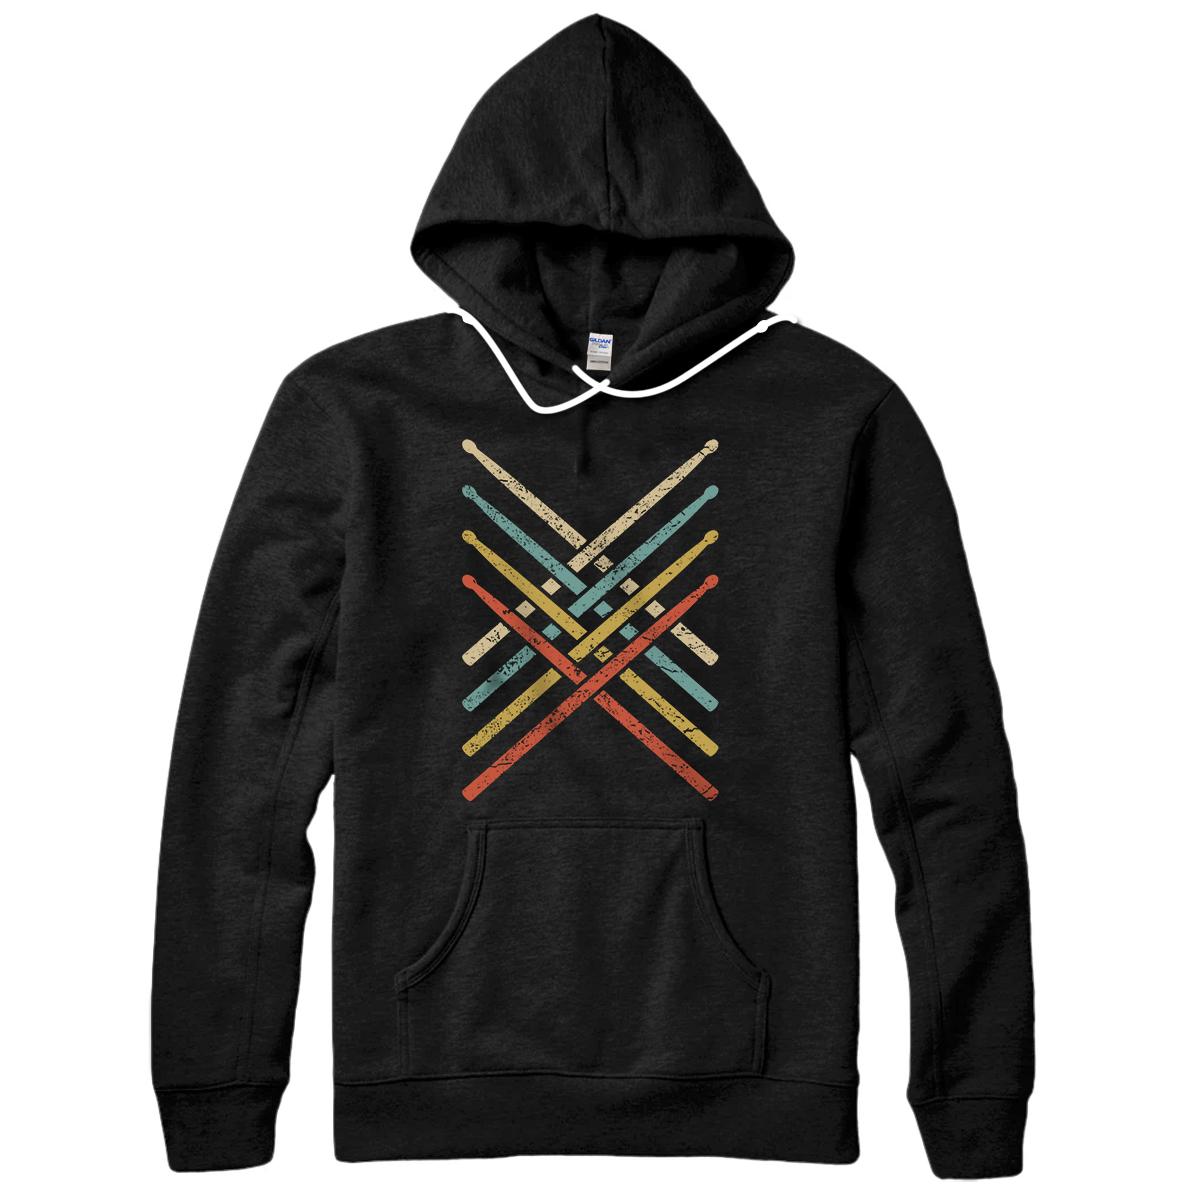 Personalized Retro Vintage Drummer Clothing 70s 80s Drum Sticks Apparel Pullover Hoodie